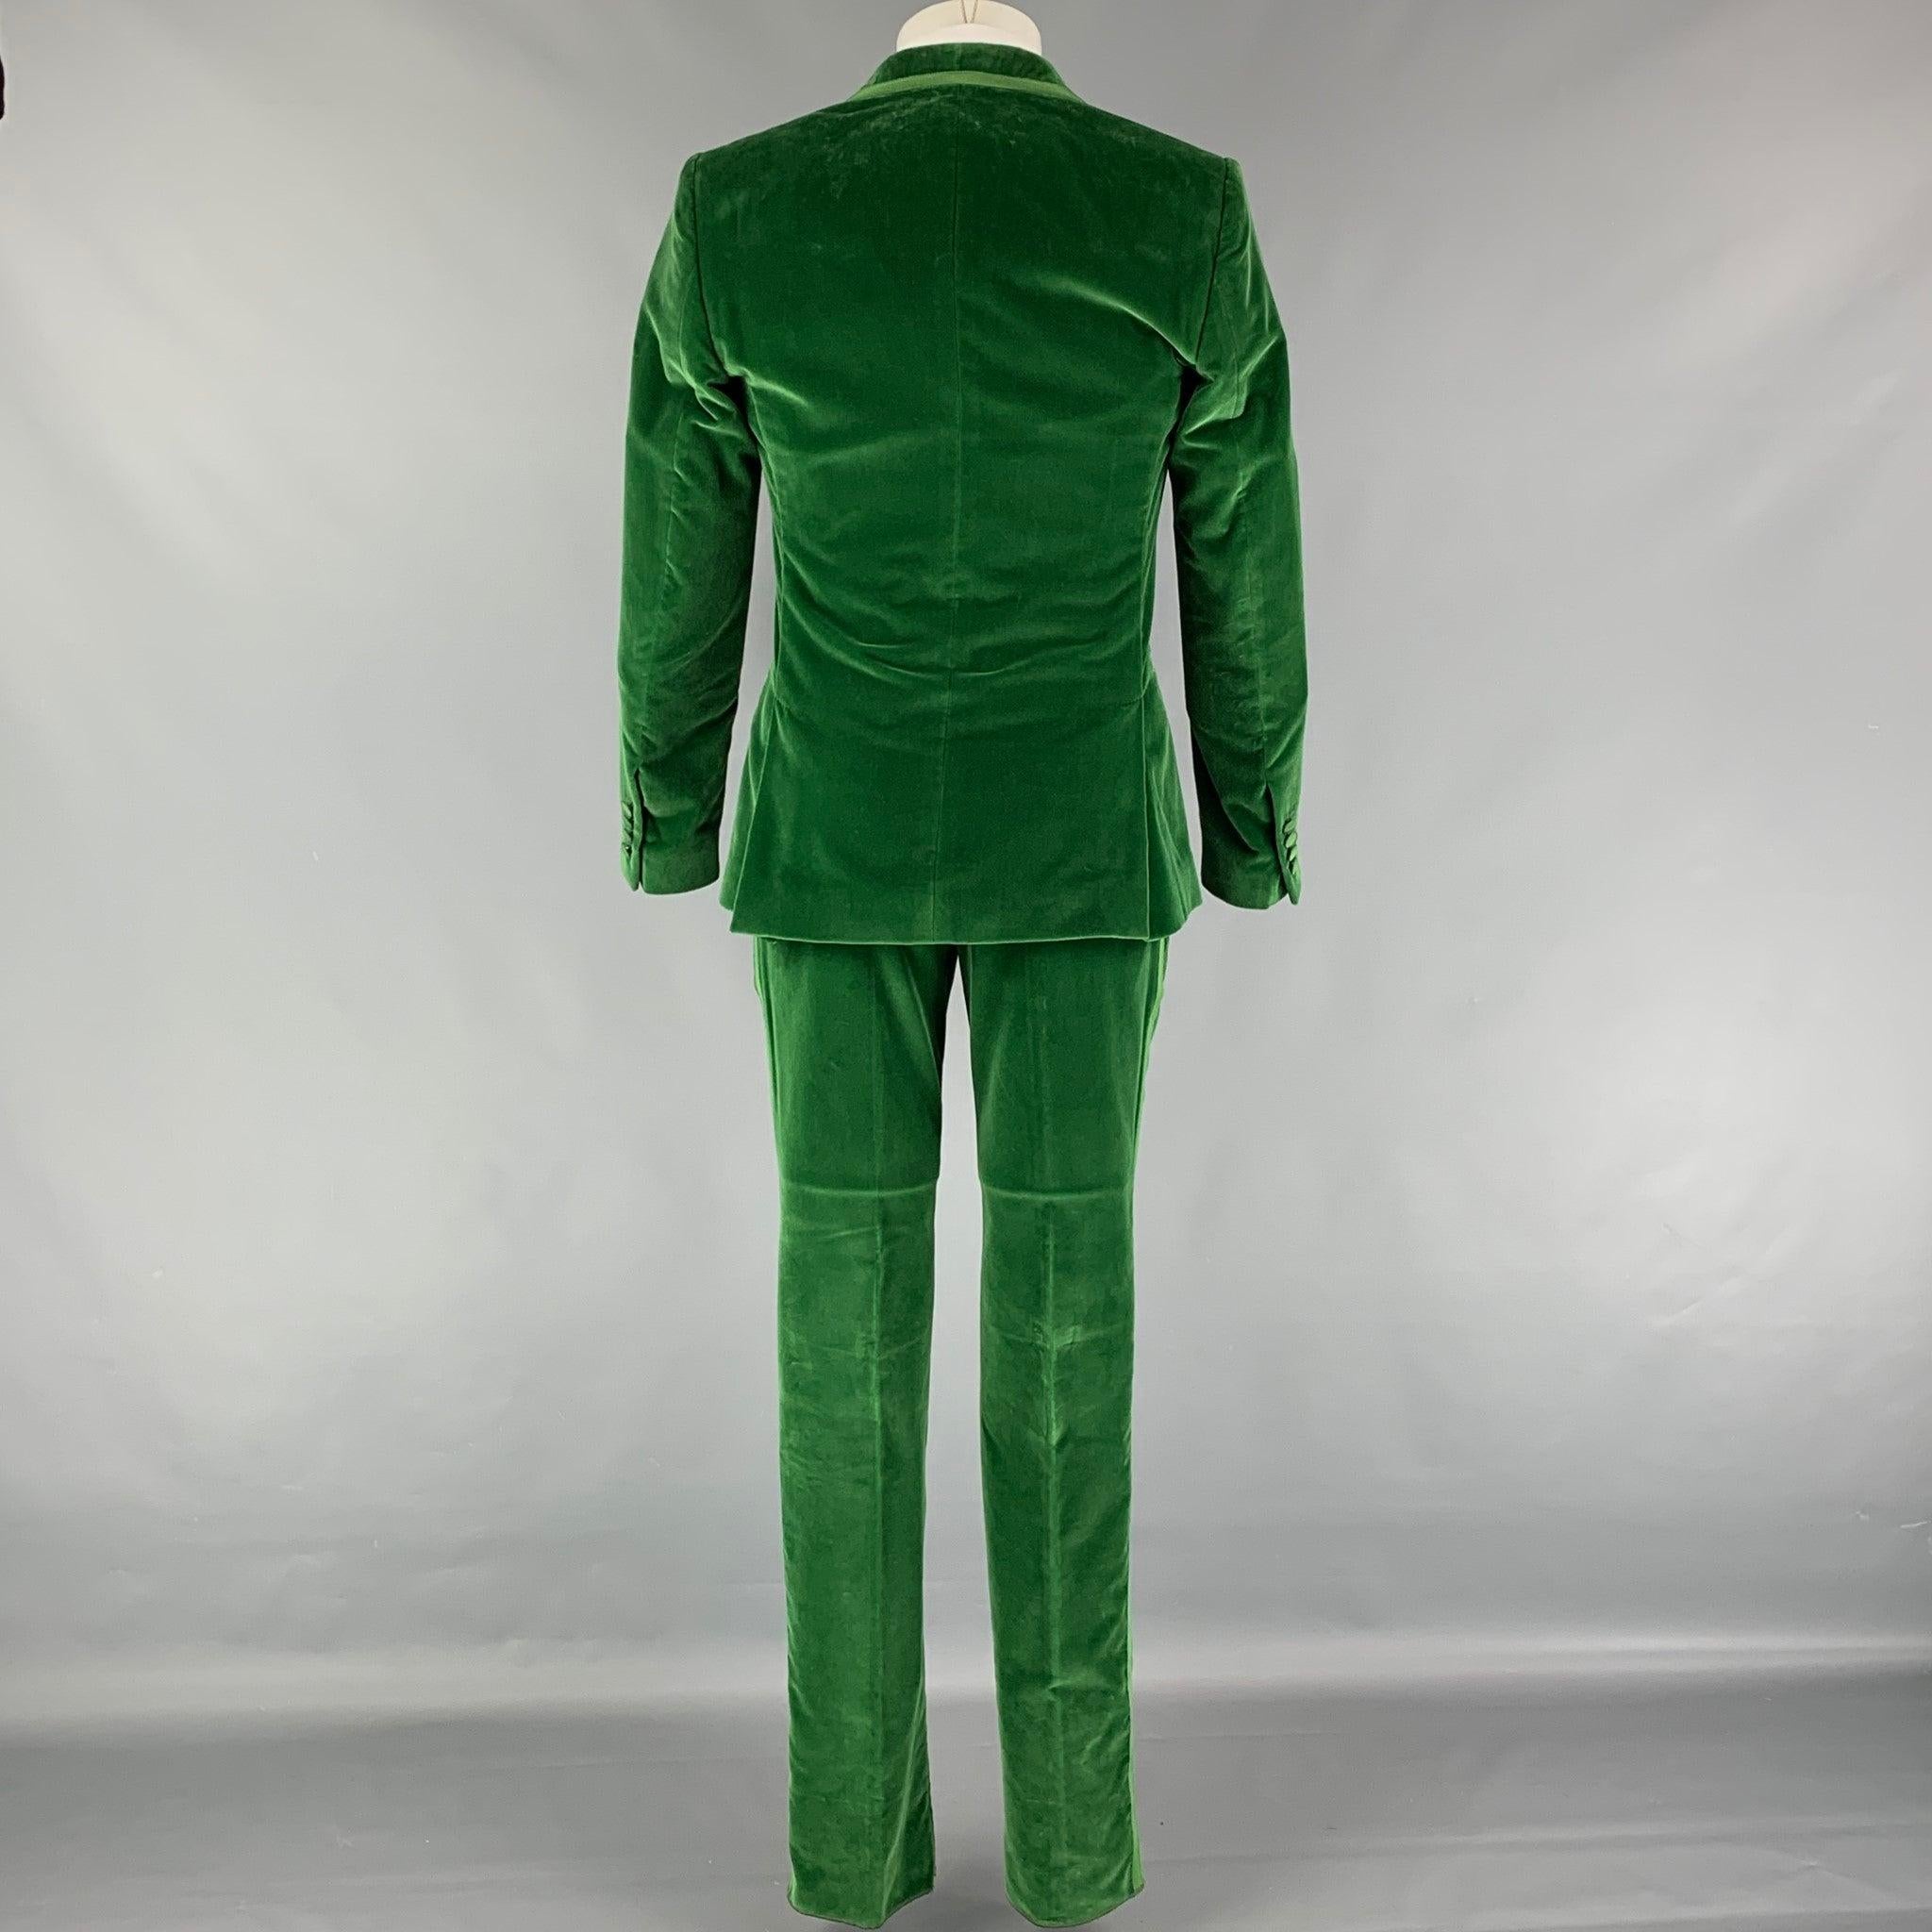 DOLCE & GABBANA Size 36 R Green Velvet Double Breasted Shawl 3 Piece Suit In Good Condition For Sale In San Francisco, CA